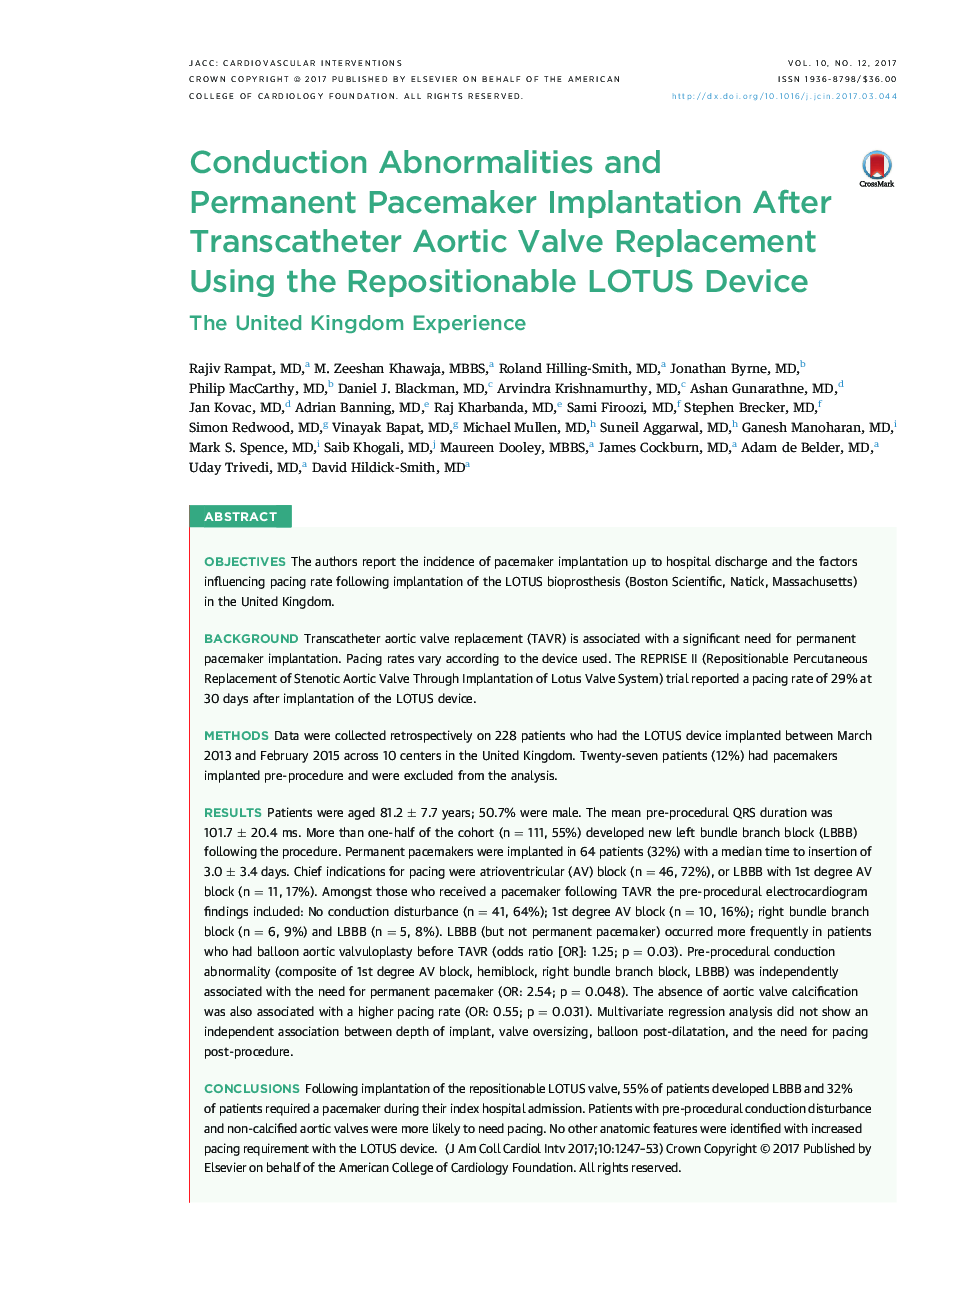 Conduction Abnormalities and PermanentÂ Pacemaker Implantation After Transcatheter Aortic Valve Replacement Using the Repositionable LOTUS Device